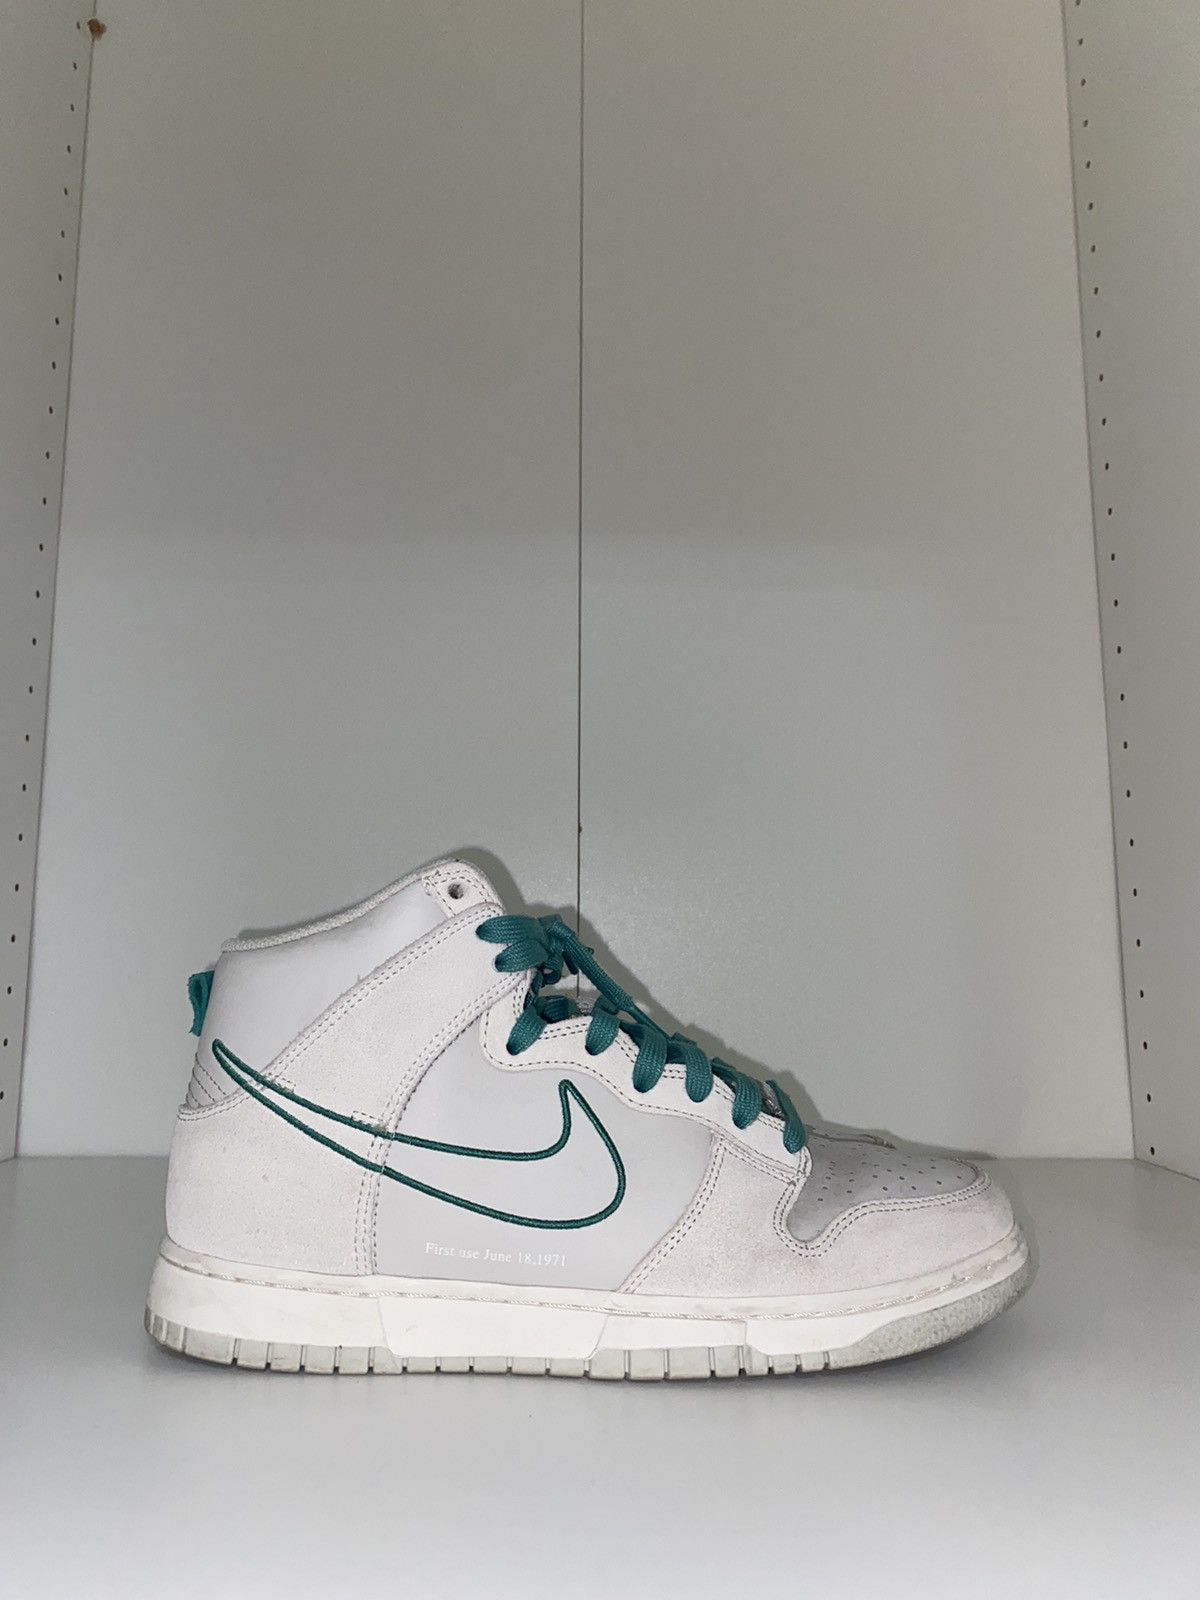 Nike Dunk High SE “First Use Pack-Green Noise” Size US 9.5 / EU 42-43 - 2 Preview